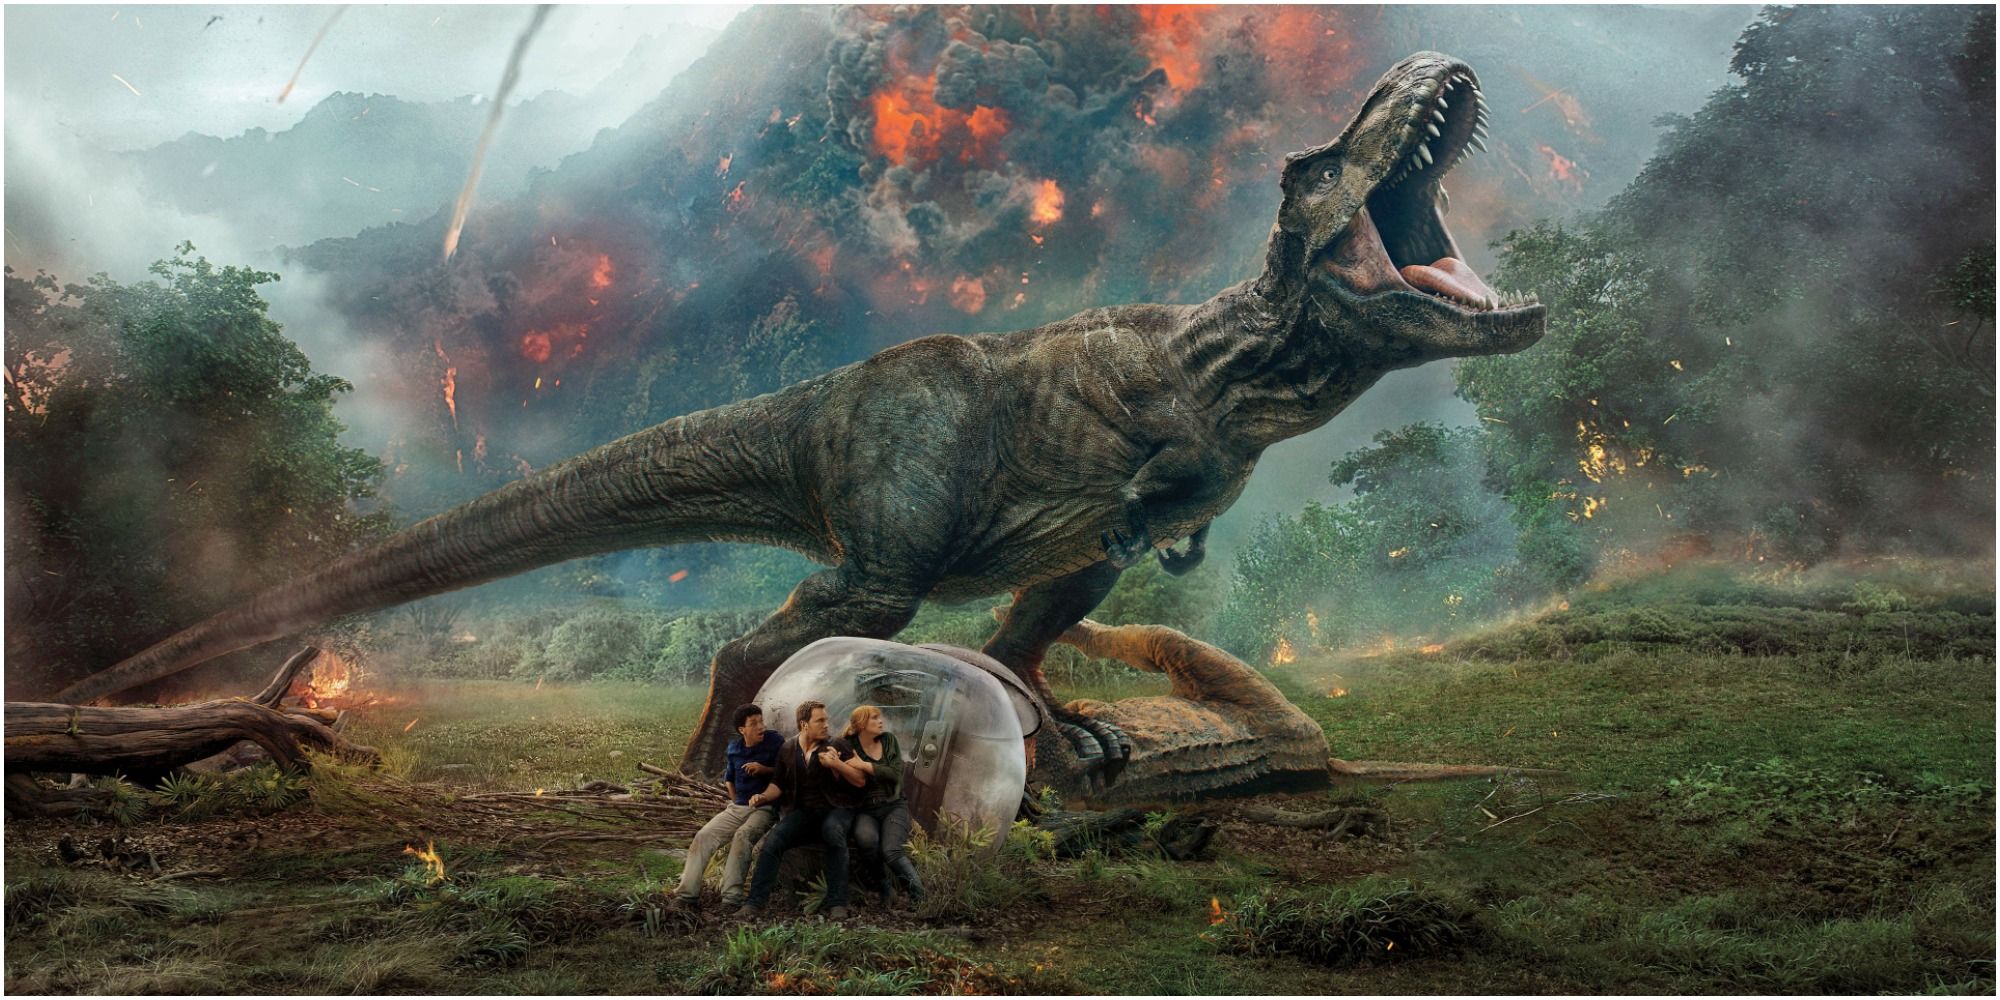 Jurassic World 3 Problems From The First Two Movies Dominion Needs To Fix